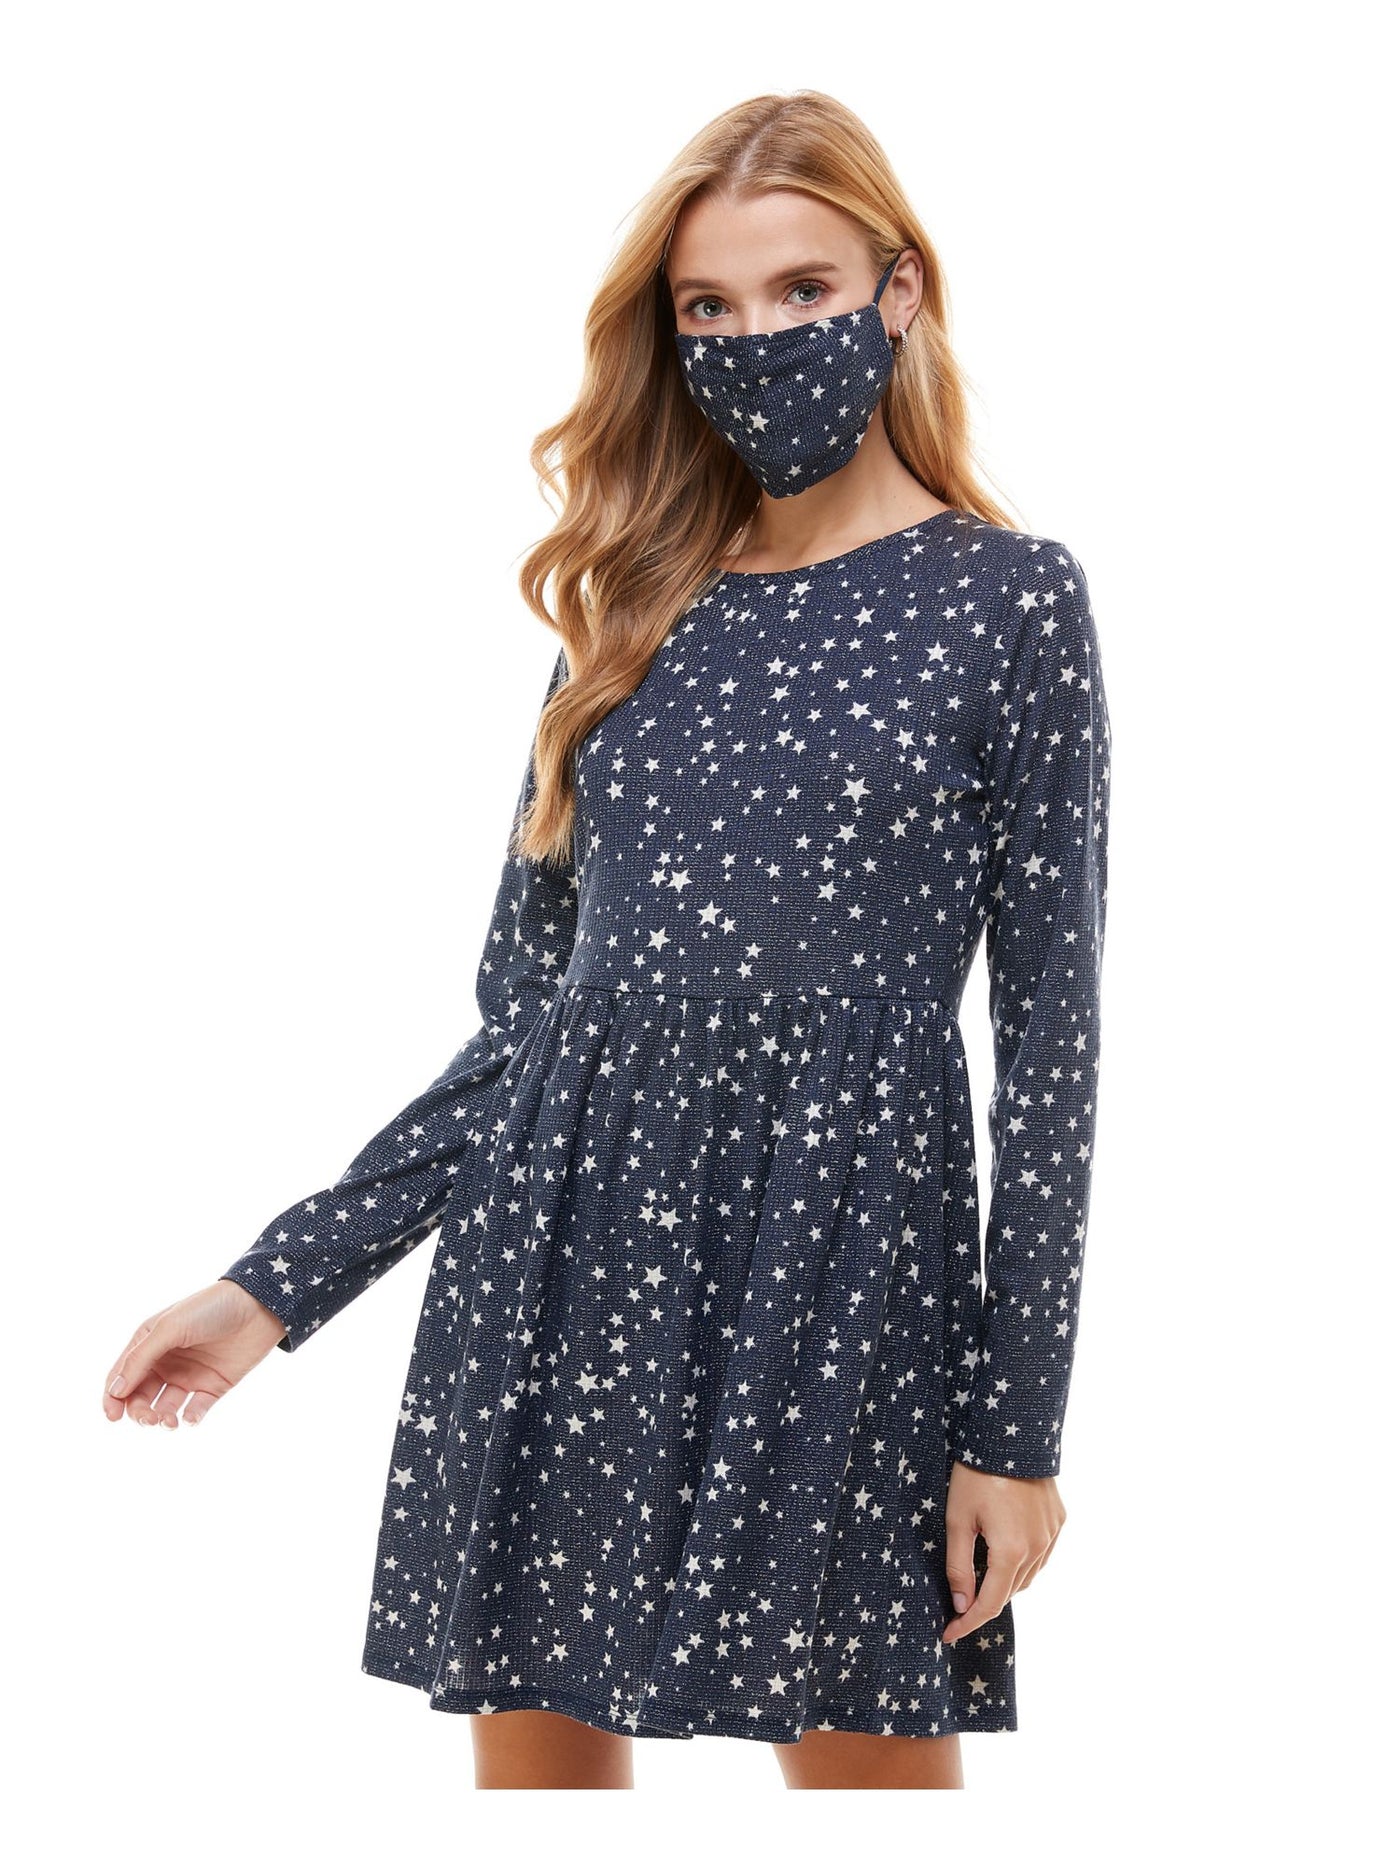 BEBOP Womens Navy Metallic With Facemask Printed Long Sleeve Crew Neck Short Fit + Flare Dress Juniors XL